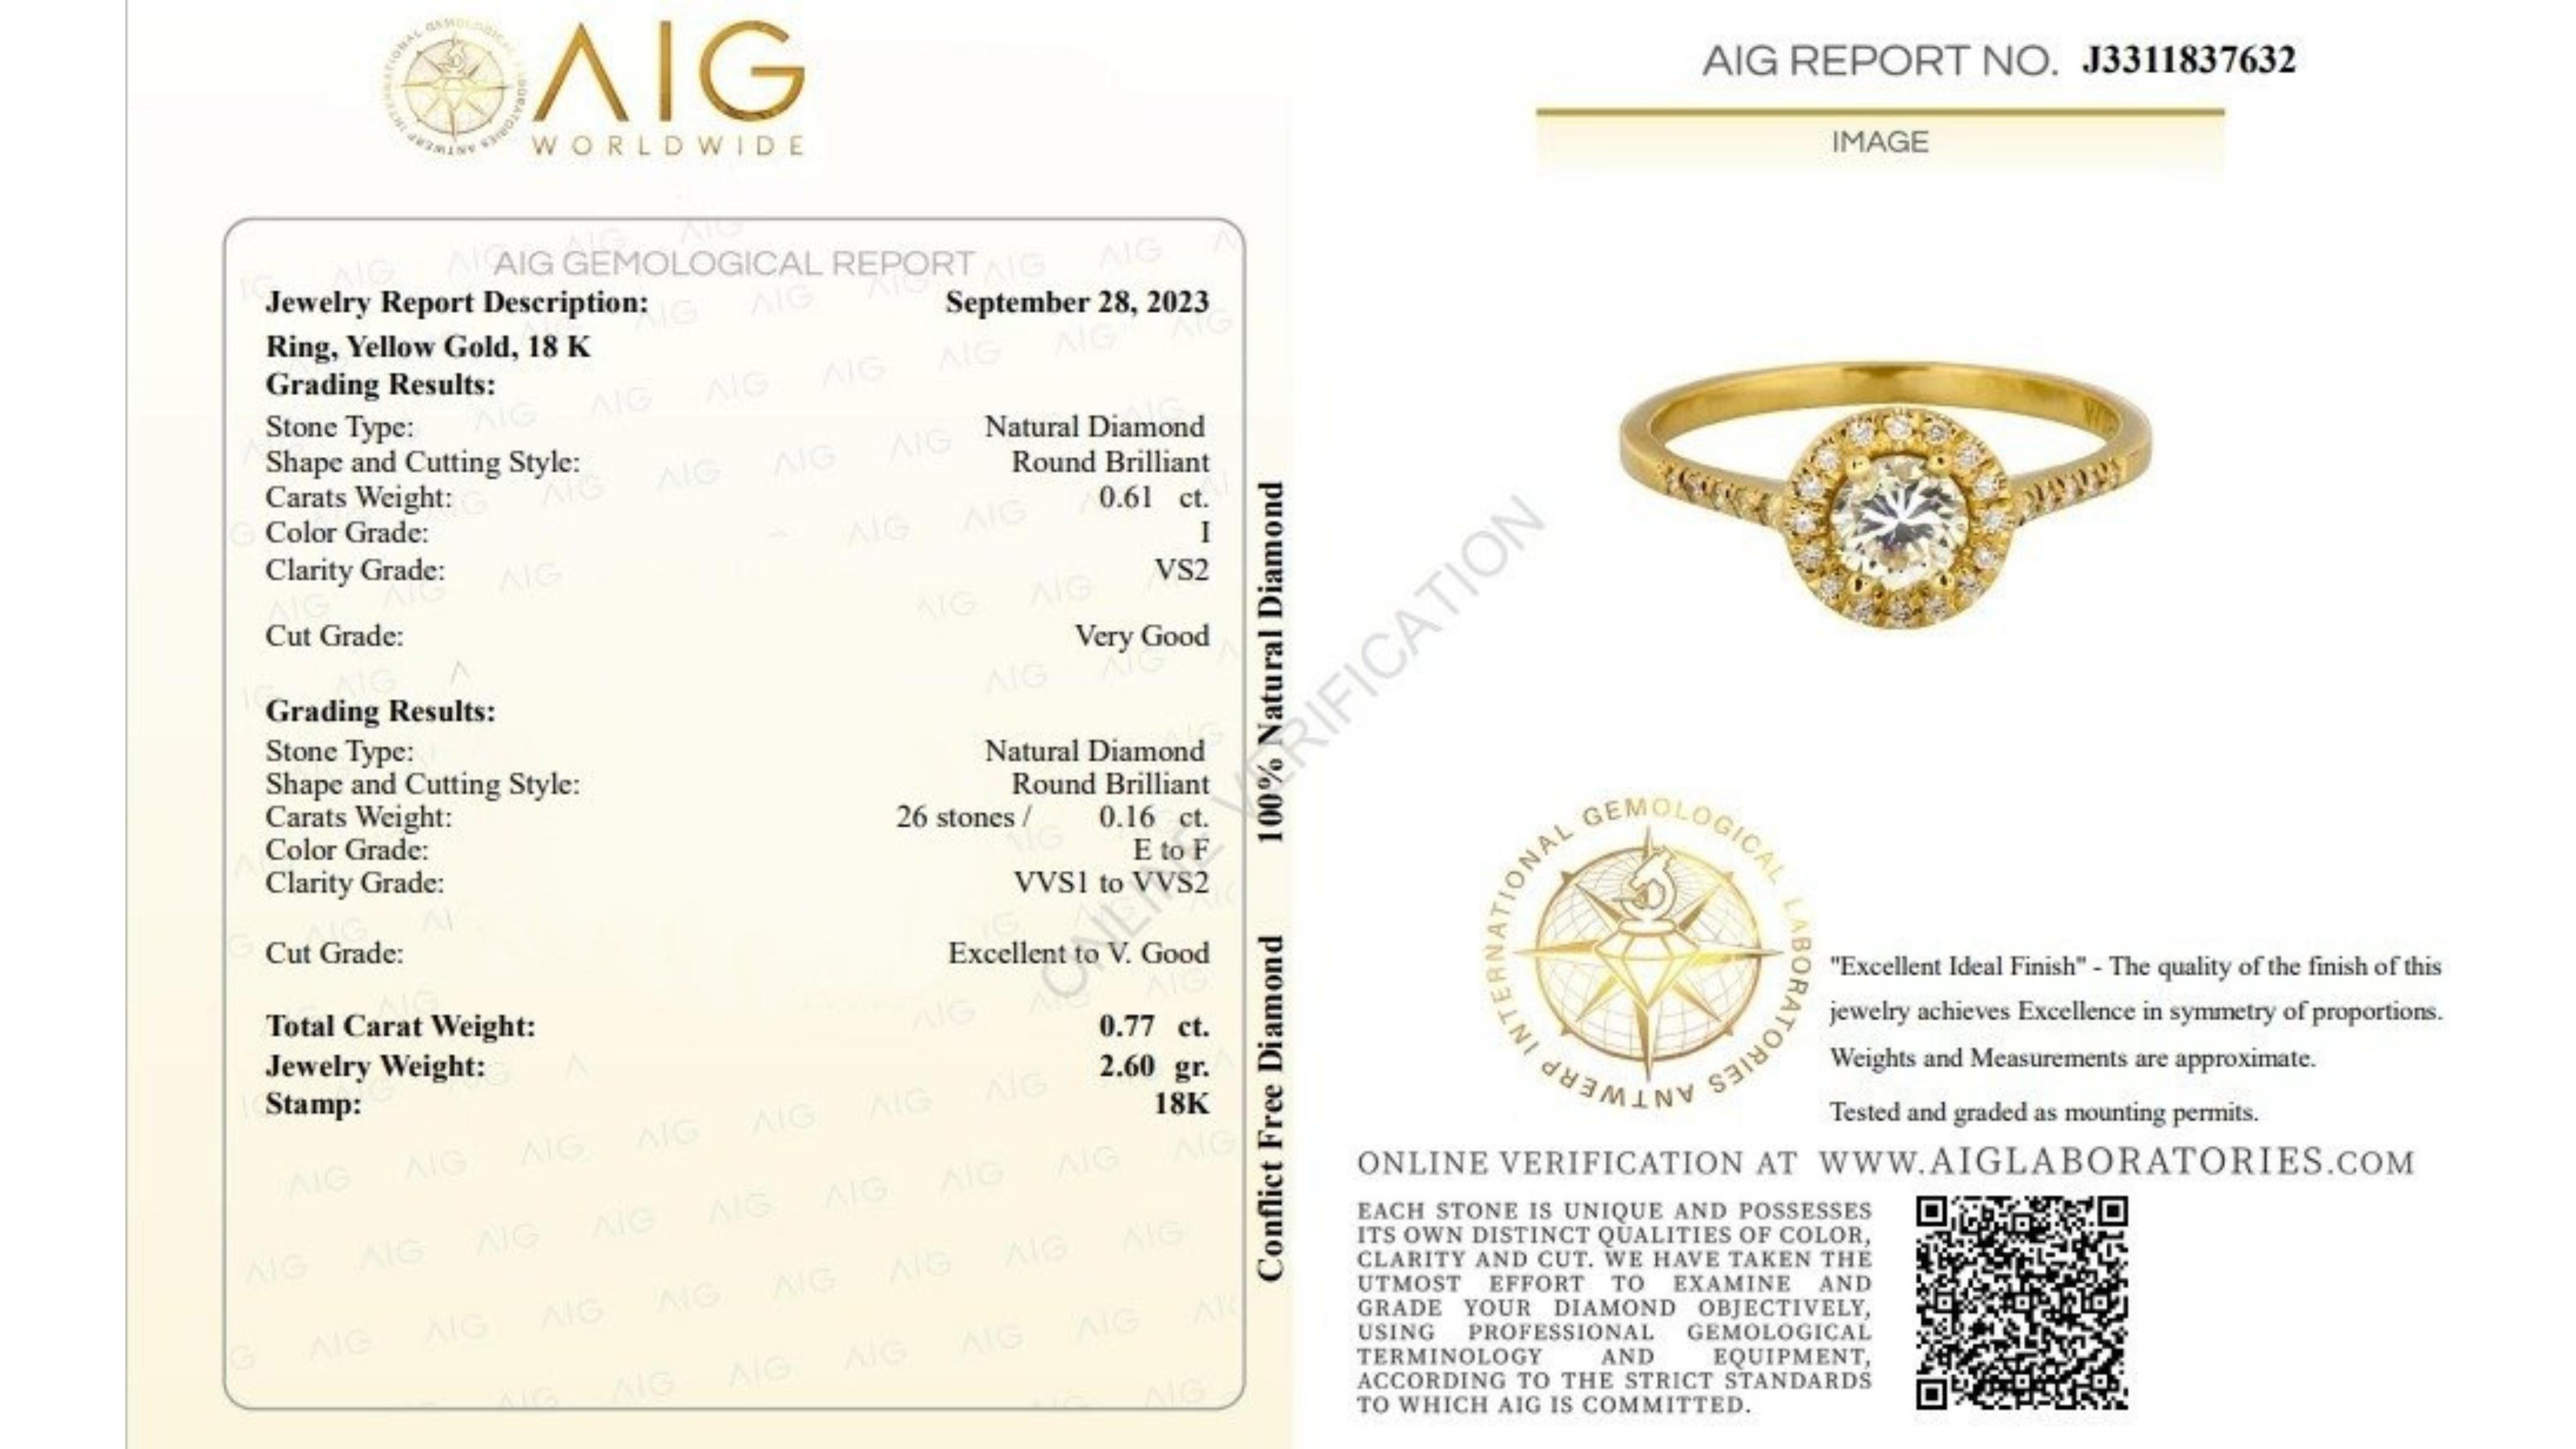 AIG Certified 0.77 Carat Round Brilliant Cut Diamond and Round Brilliant Side Stones Pave Ring in 18K Yellow Gold

This fabulous pave ring features a dazzling 0.61 carat round brilliant natural diamond center stone and 0.16 carats of round brilliant